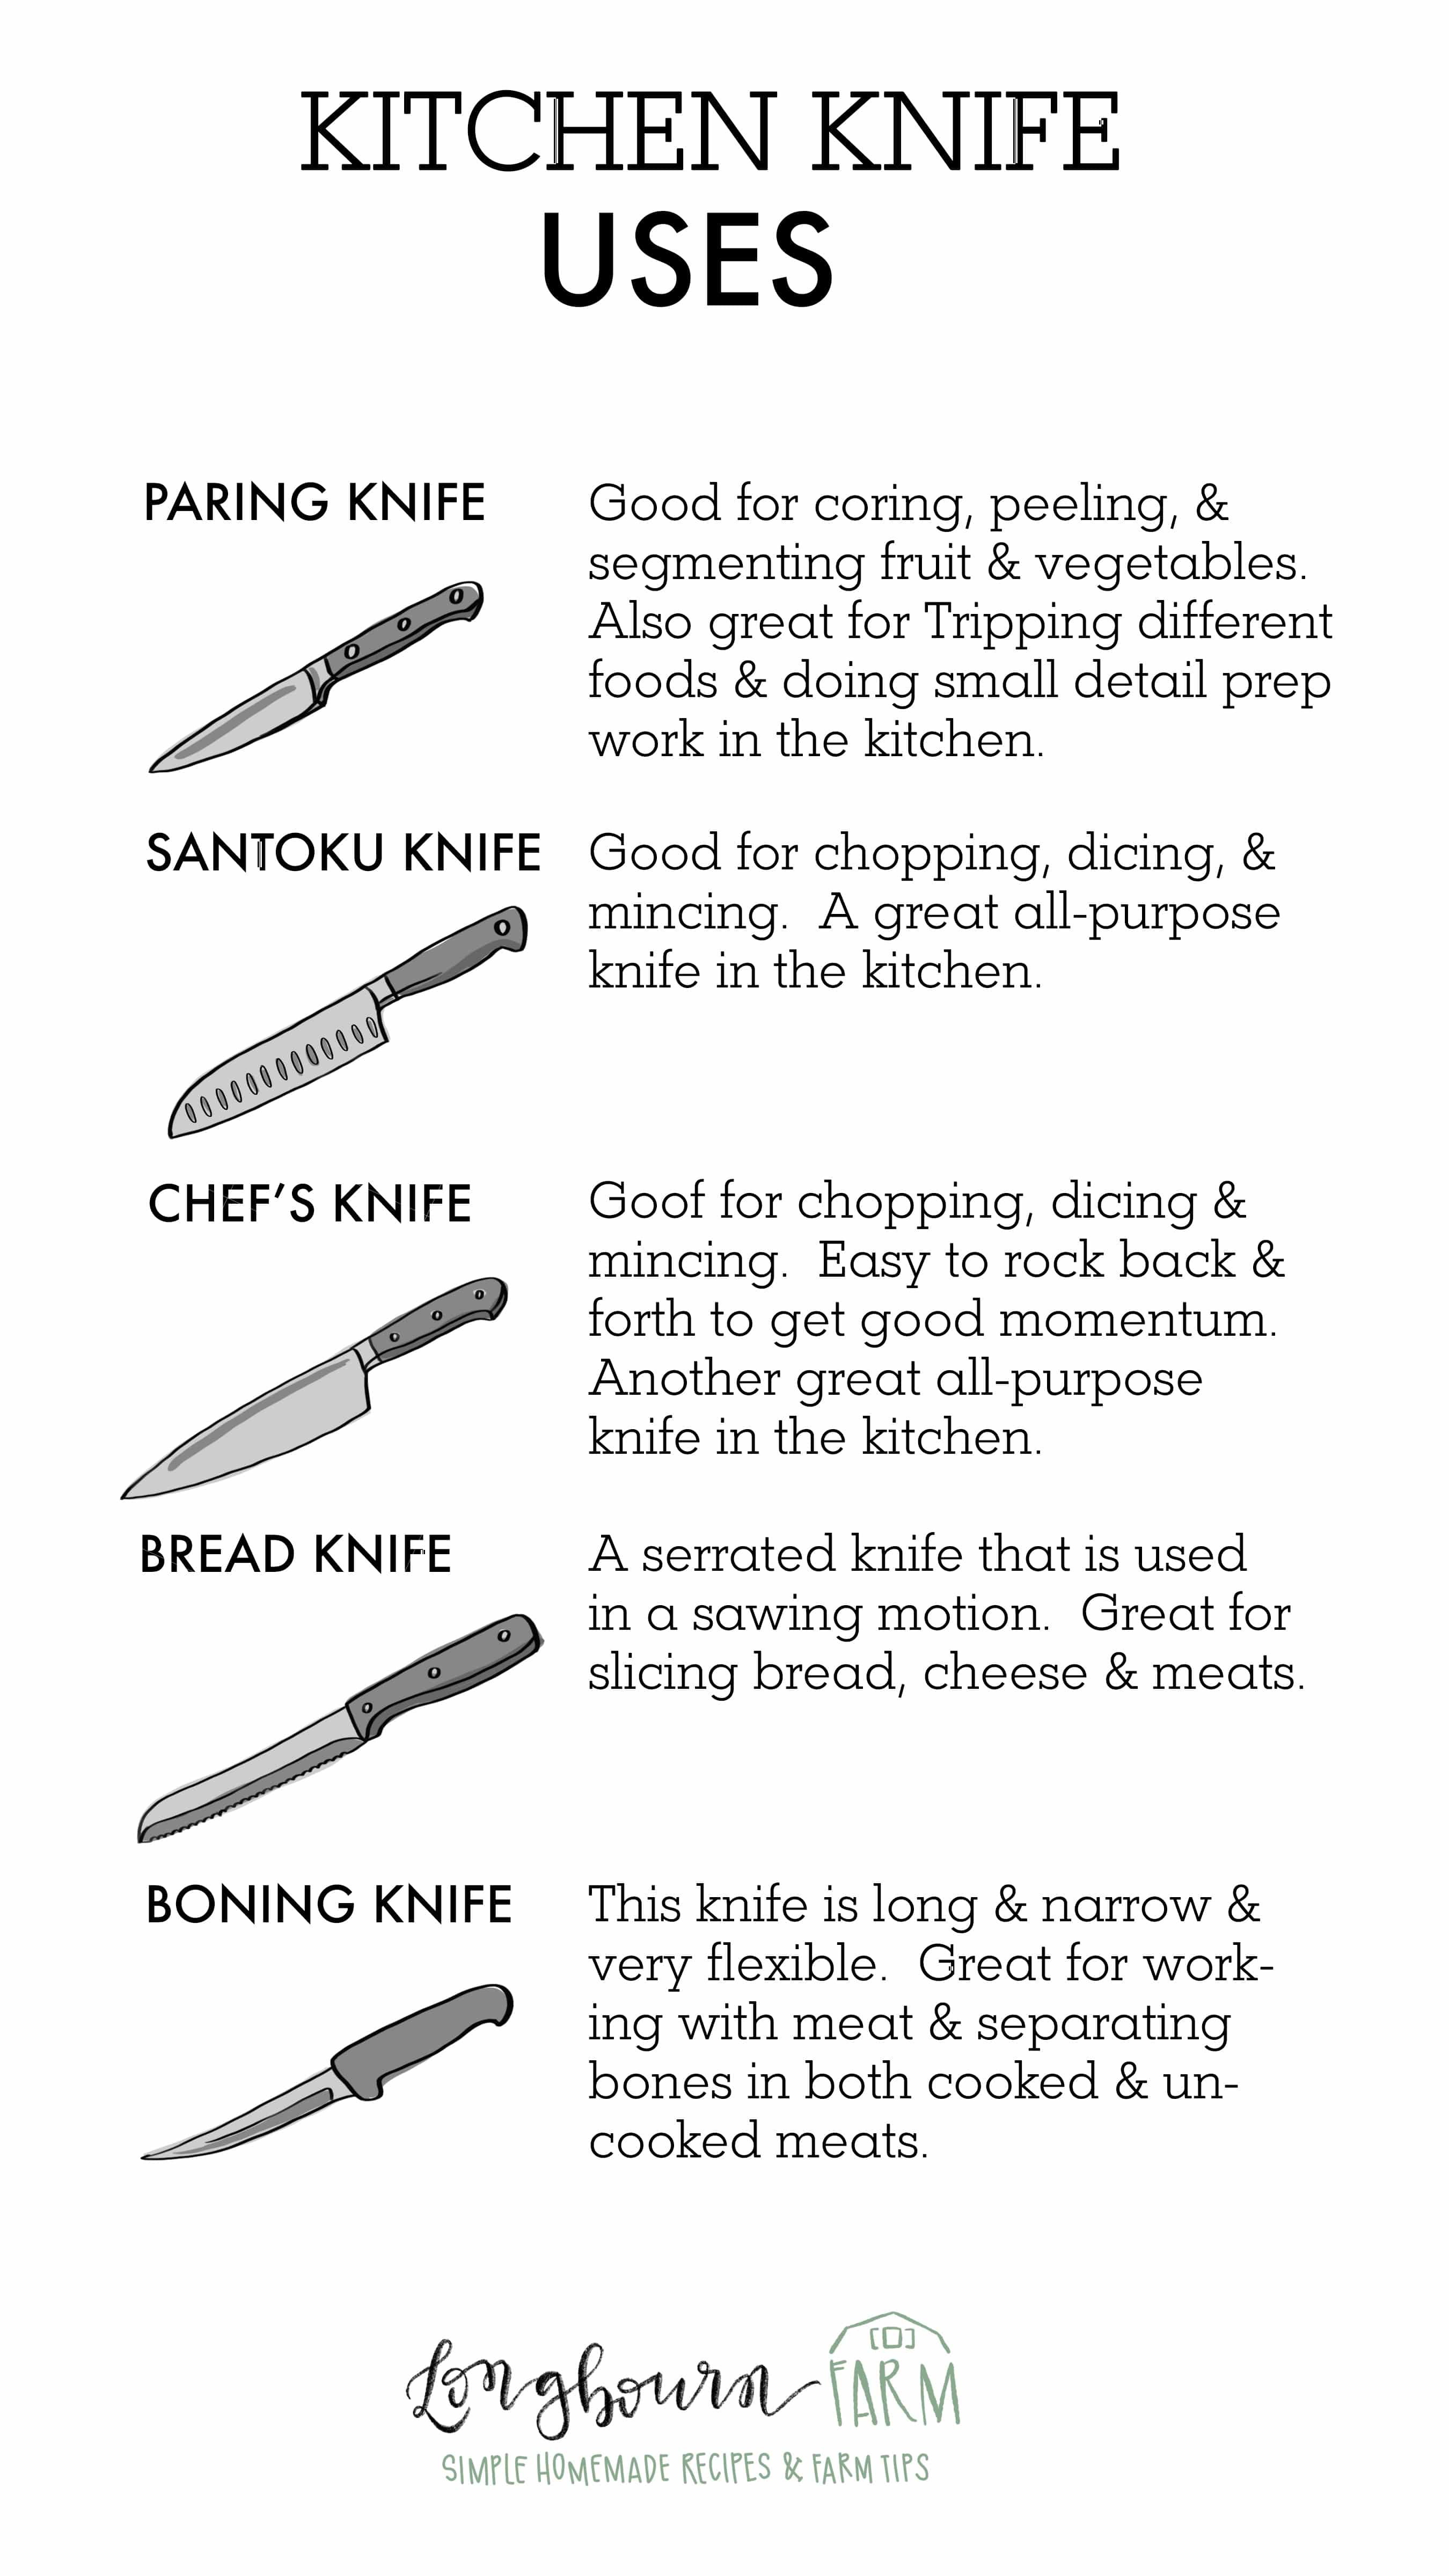 Learning the proper kitchen knife uses is important for quick work in the kitchen! It's also very important for keeping yourself safe while cooking. #kitchenknife #kitchenknifeuses #kitchenknifes